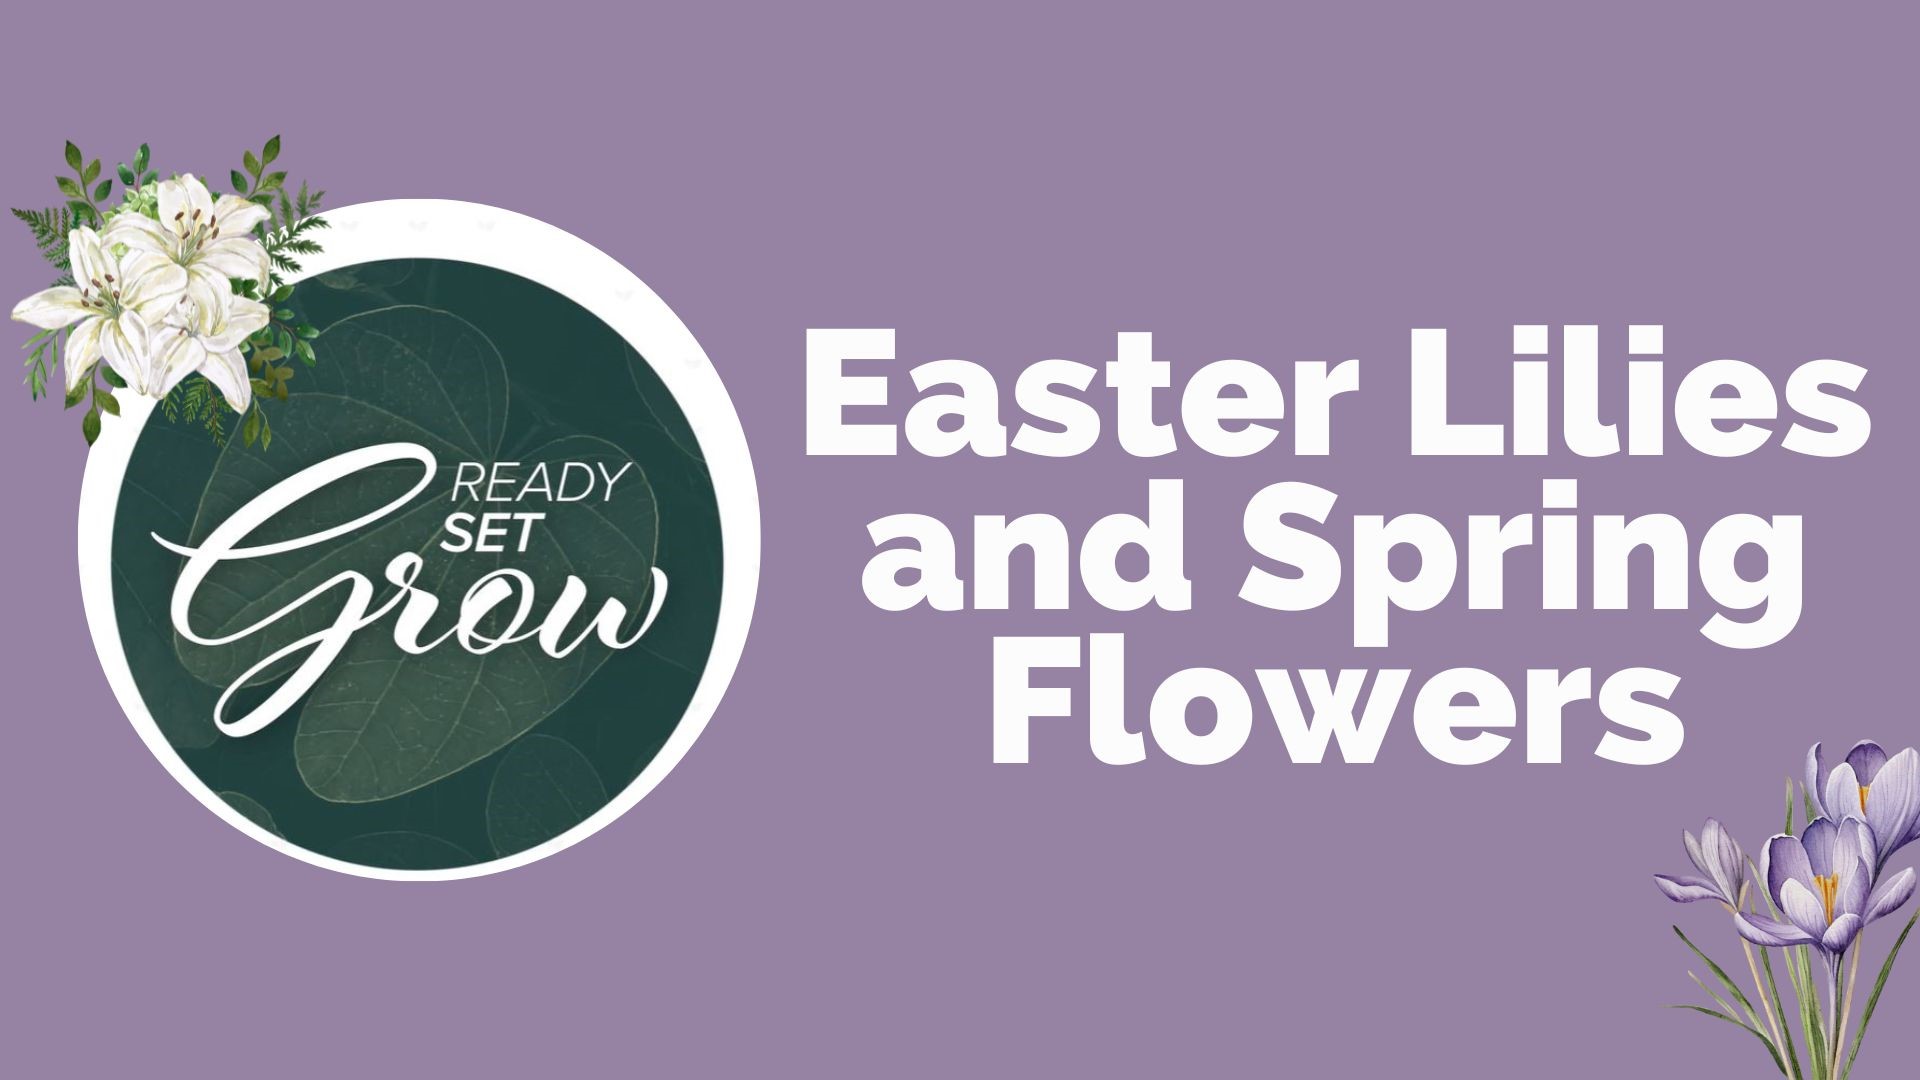 Spring is here and it is time to enjoy the flowers. Where tulips, bluebonnets and wildflowers can be seen in the U.S., plus your guide to Easter lilies.